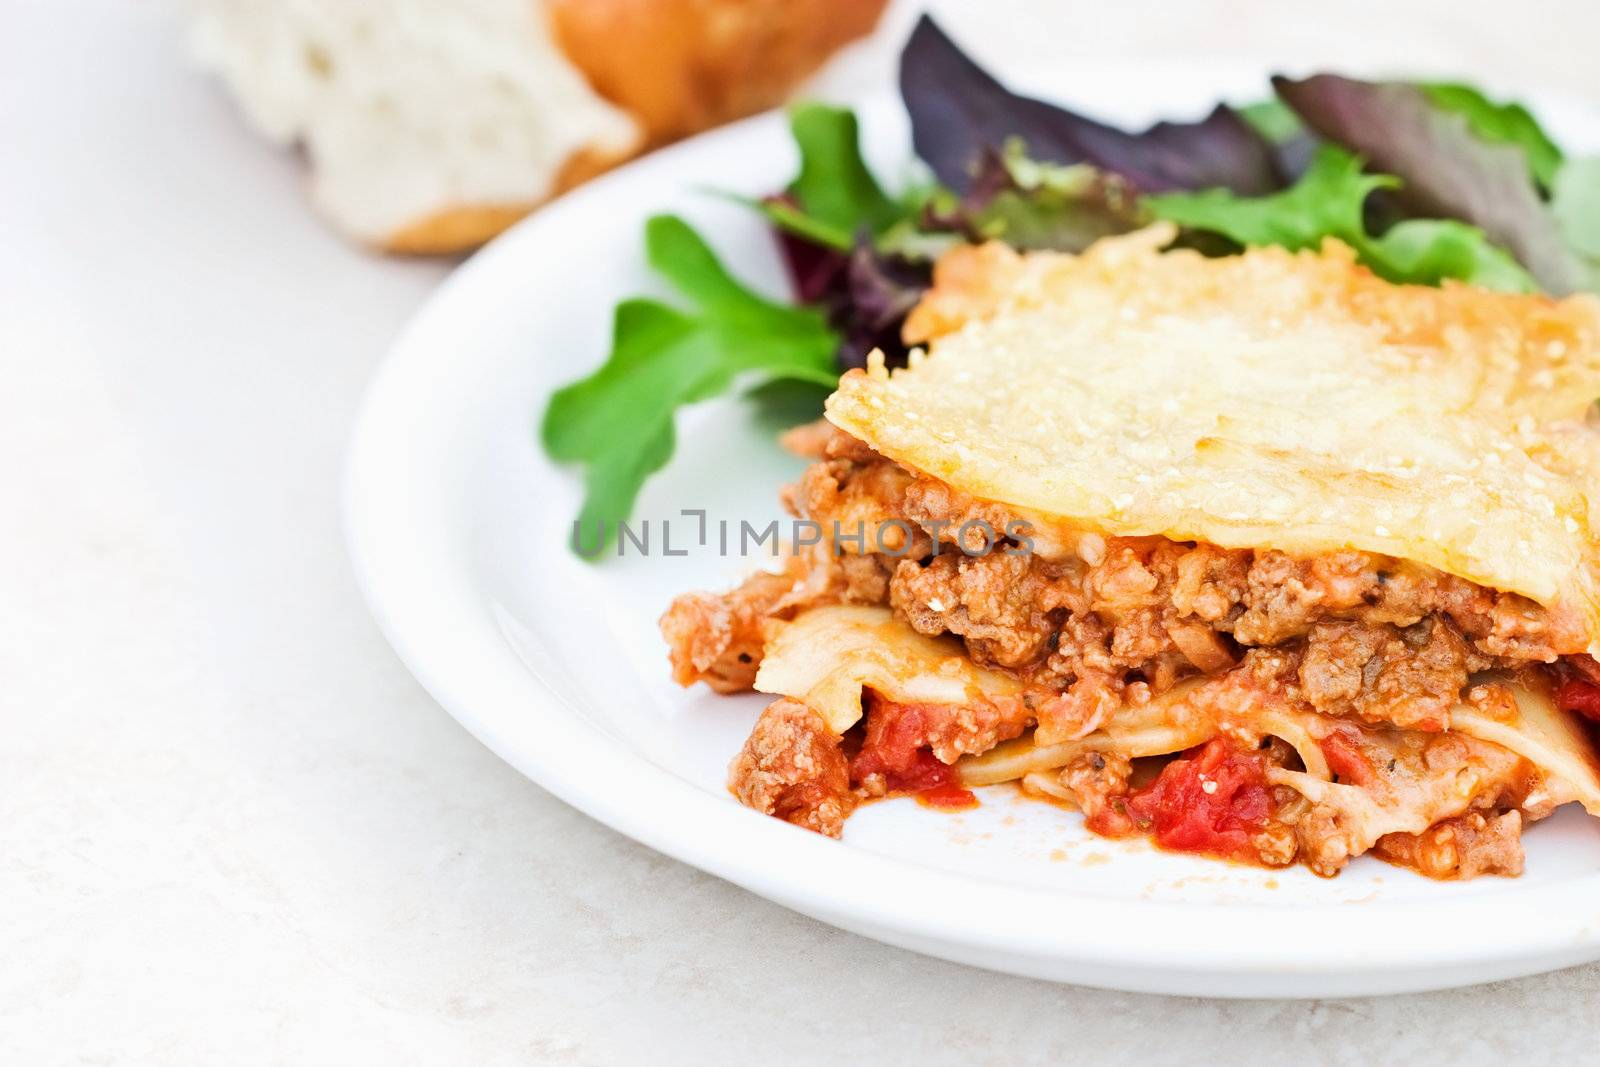 Meat lasagna with herb and mint salad and bread. Shallow DOF with focus on lasagna.